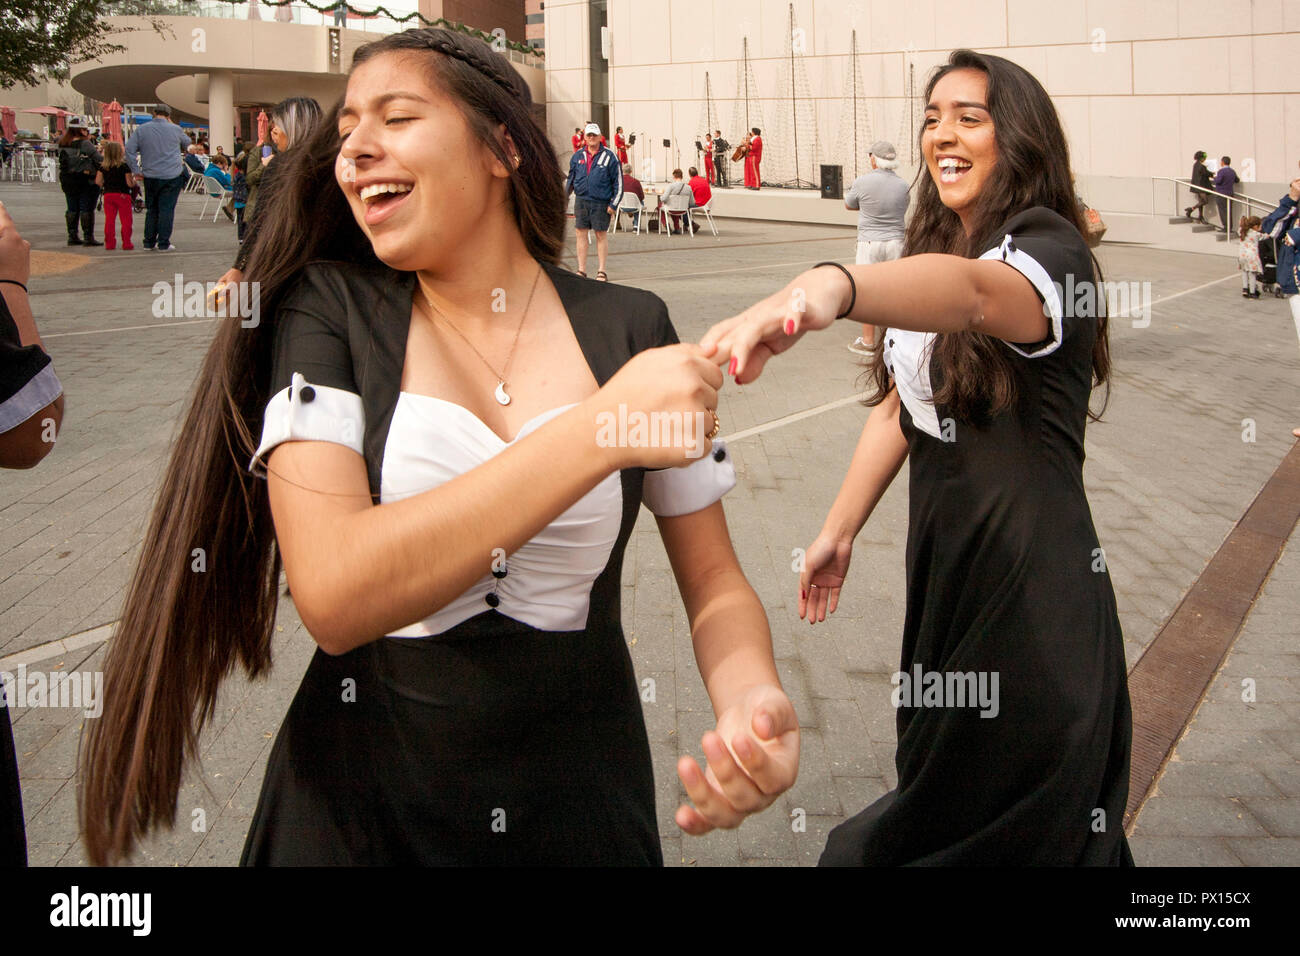 Hispanic teen girls dance to the music of a Mariachi band at an Outdoor ethnic festival in Costa Mesa, CA. Stock Photo